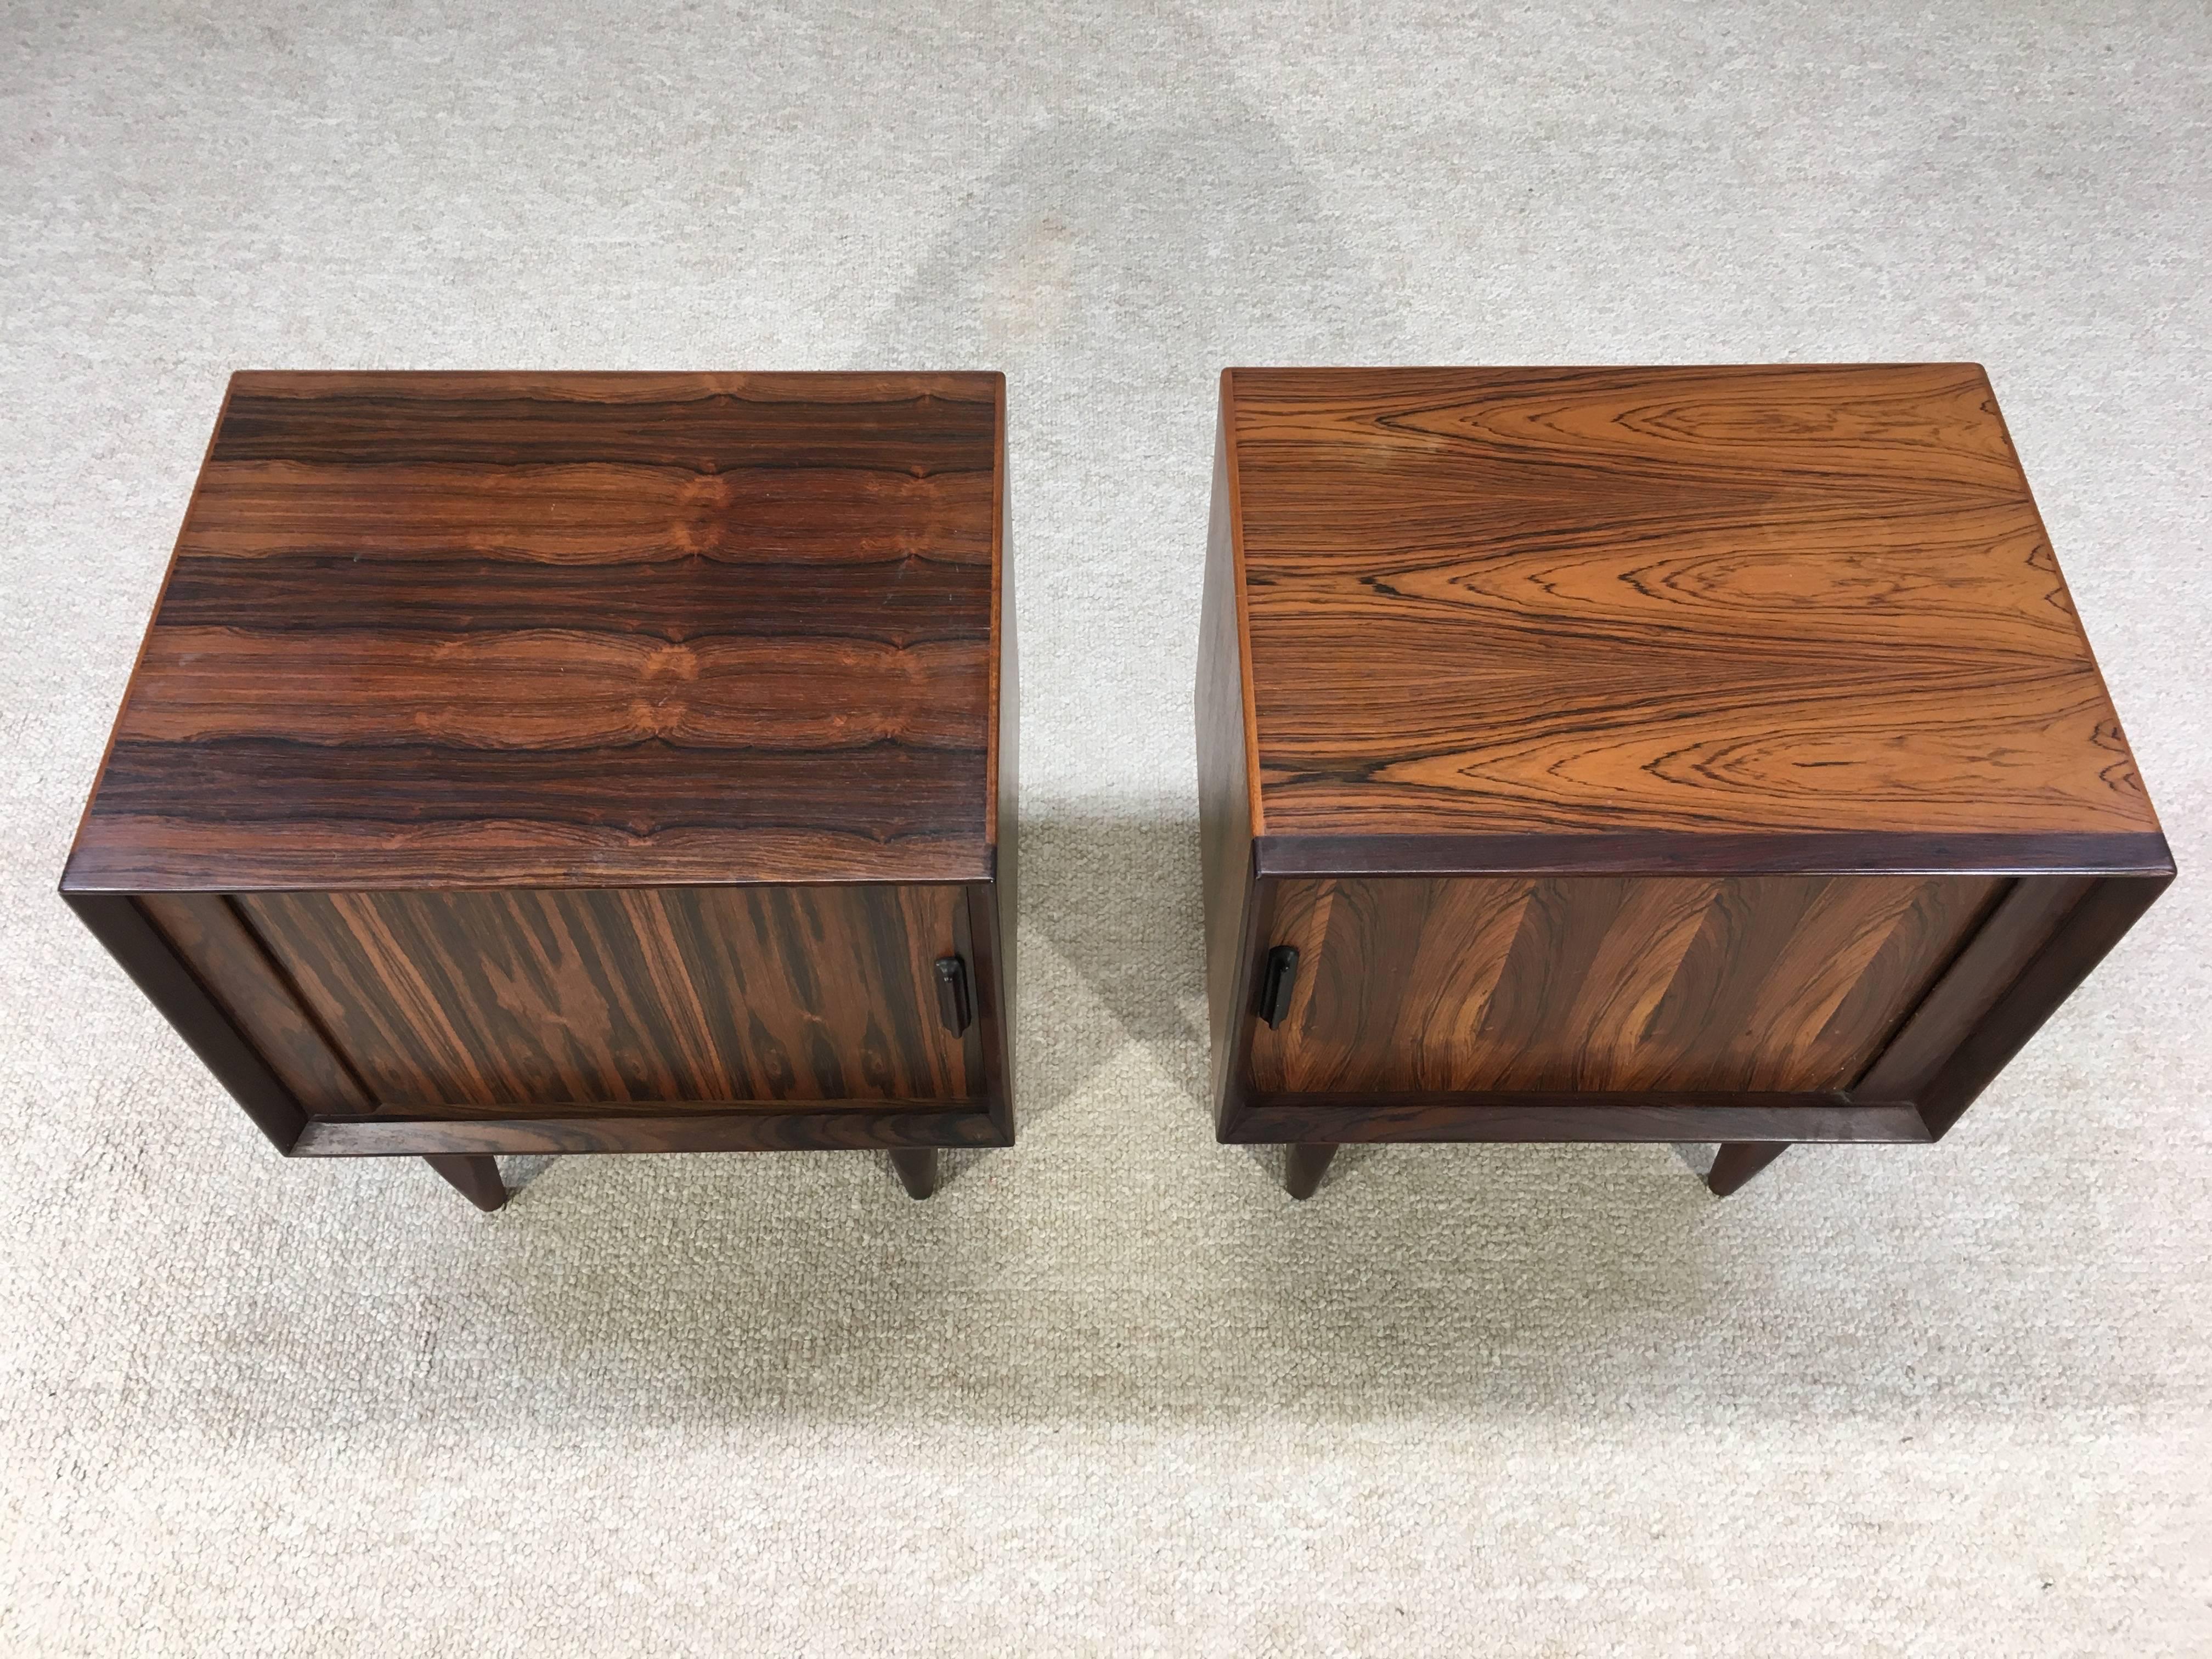 A beautifully grained pair of Brazilian rosewood nightstands having tambour doors by Arne Wahl Iversen for Falster Denmark.